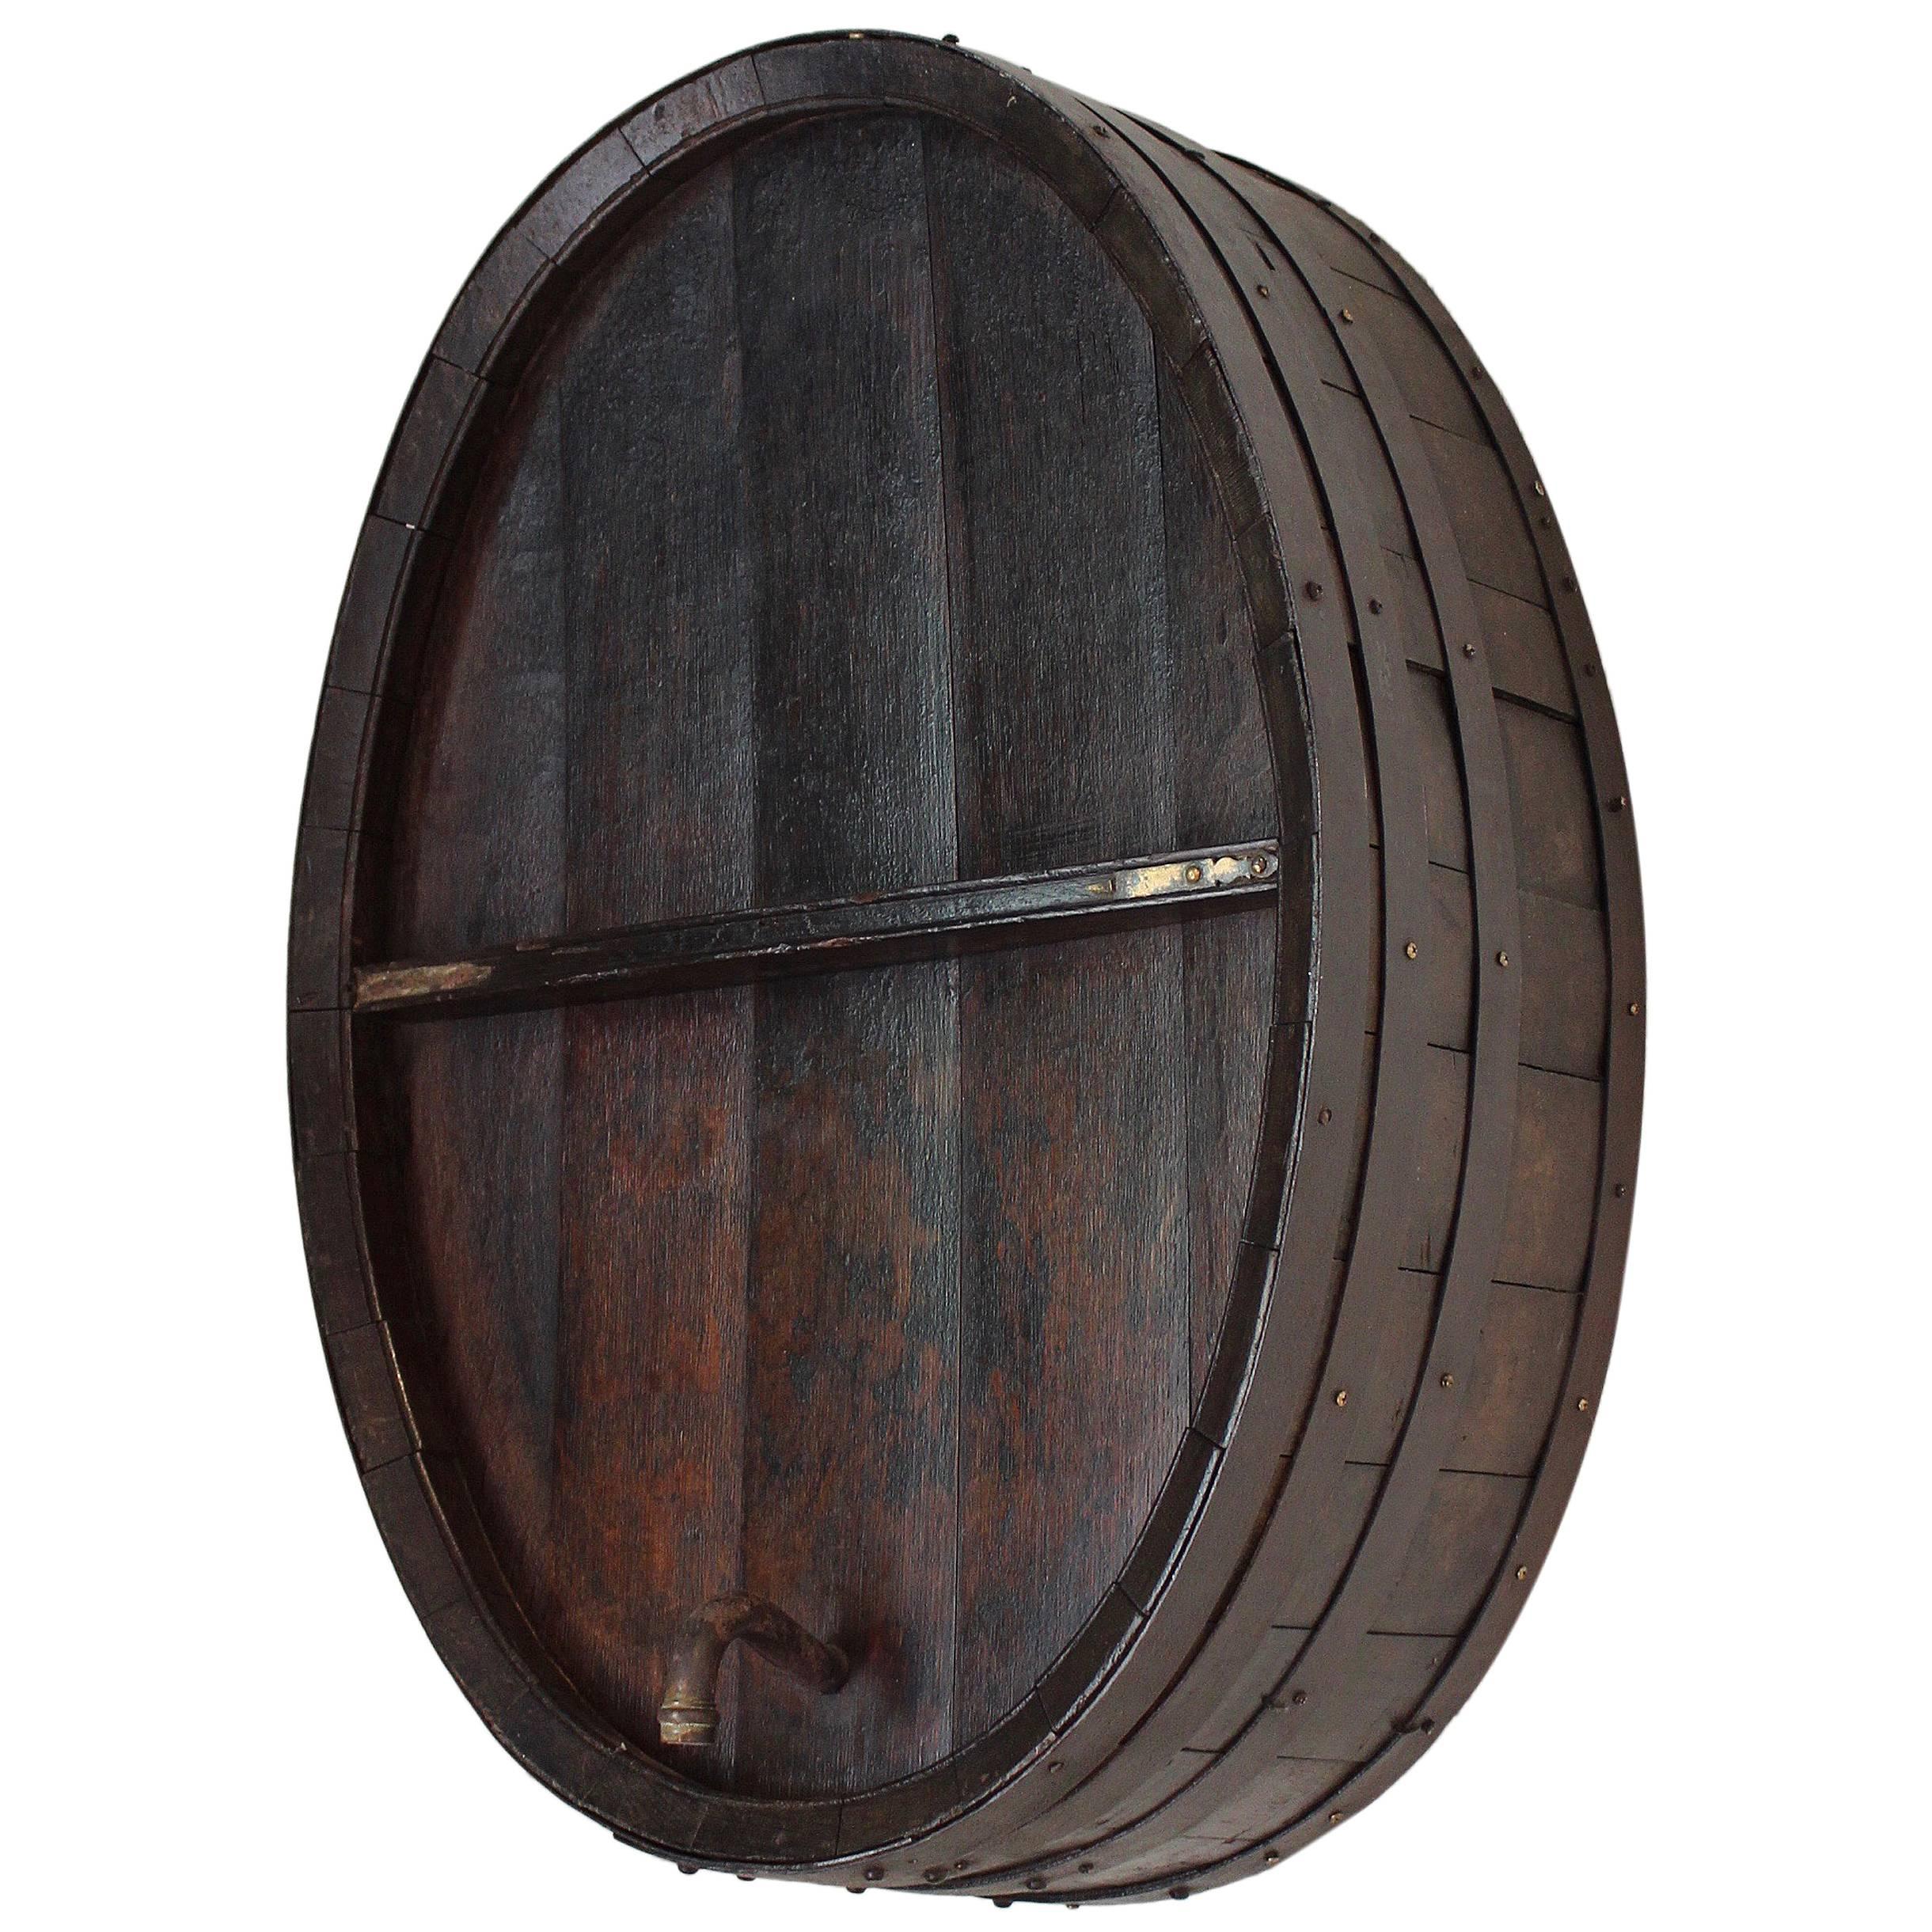 Antique French Iron Banded Wine Barrel as Wall Decor, circa 1900